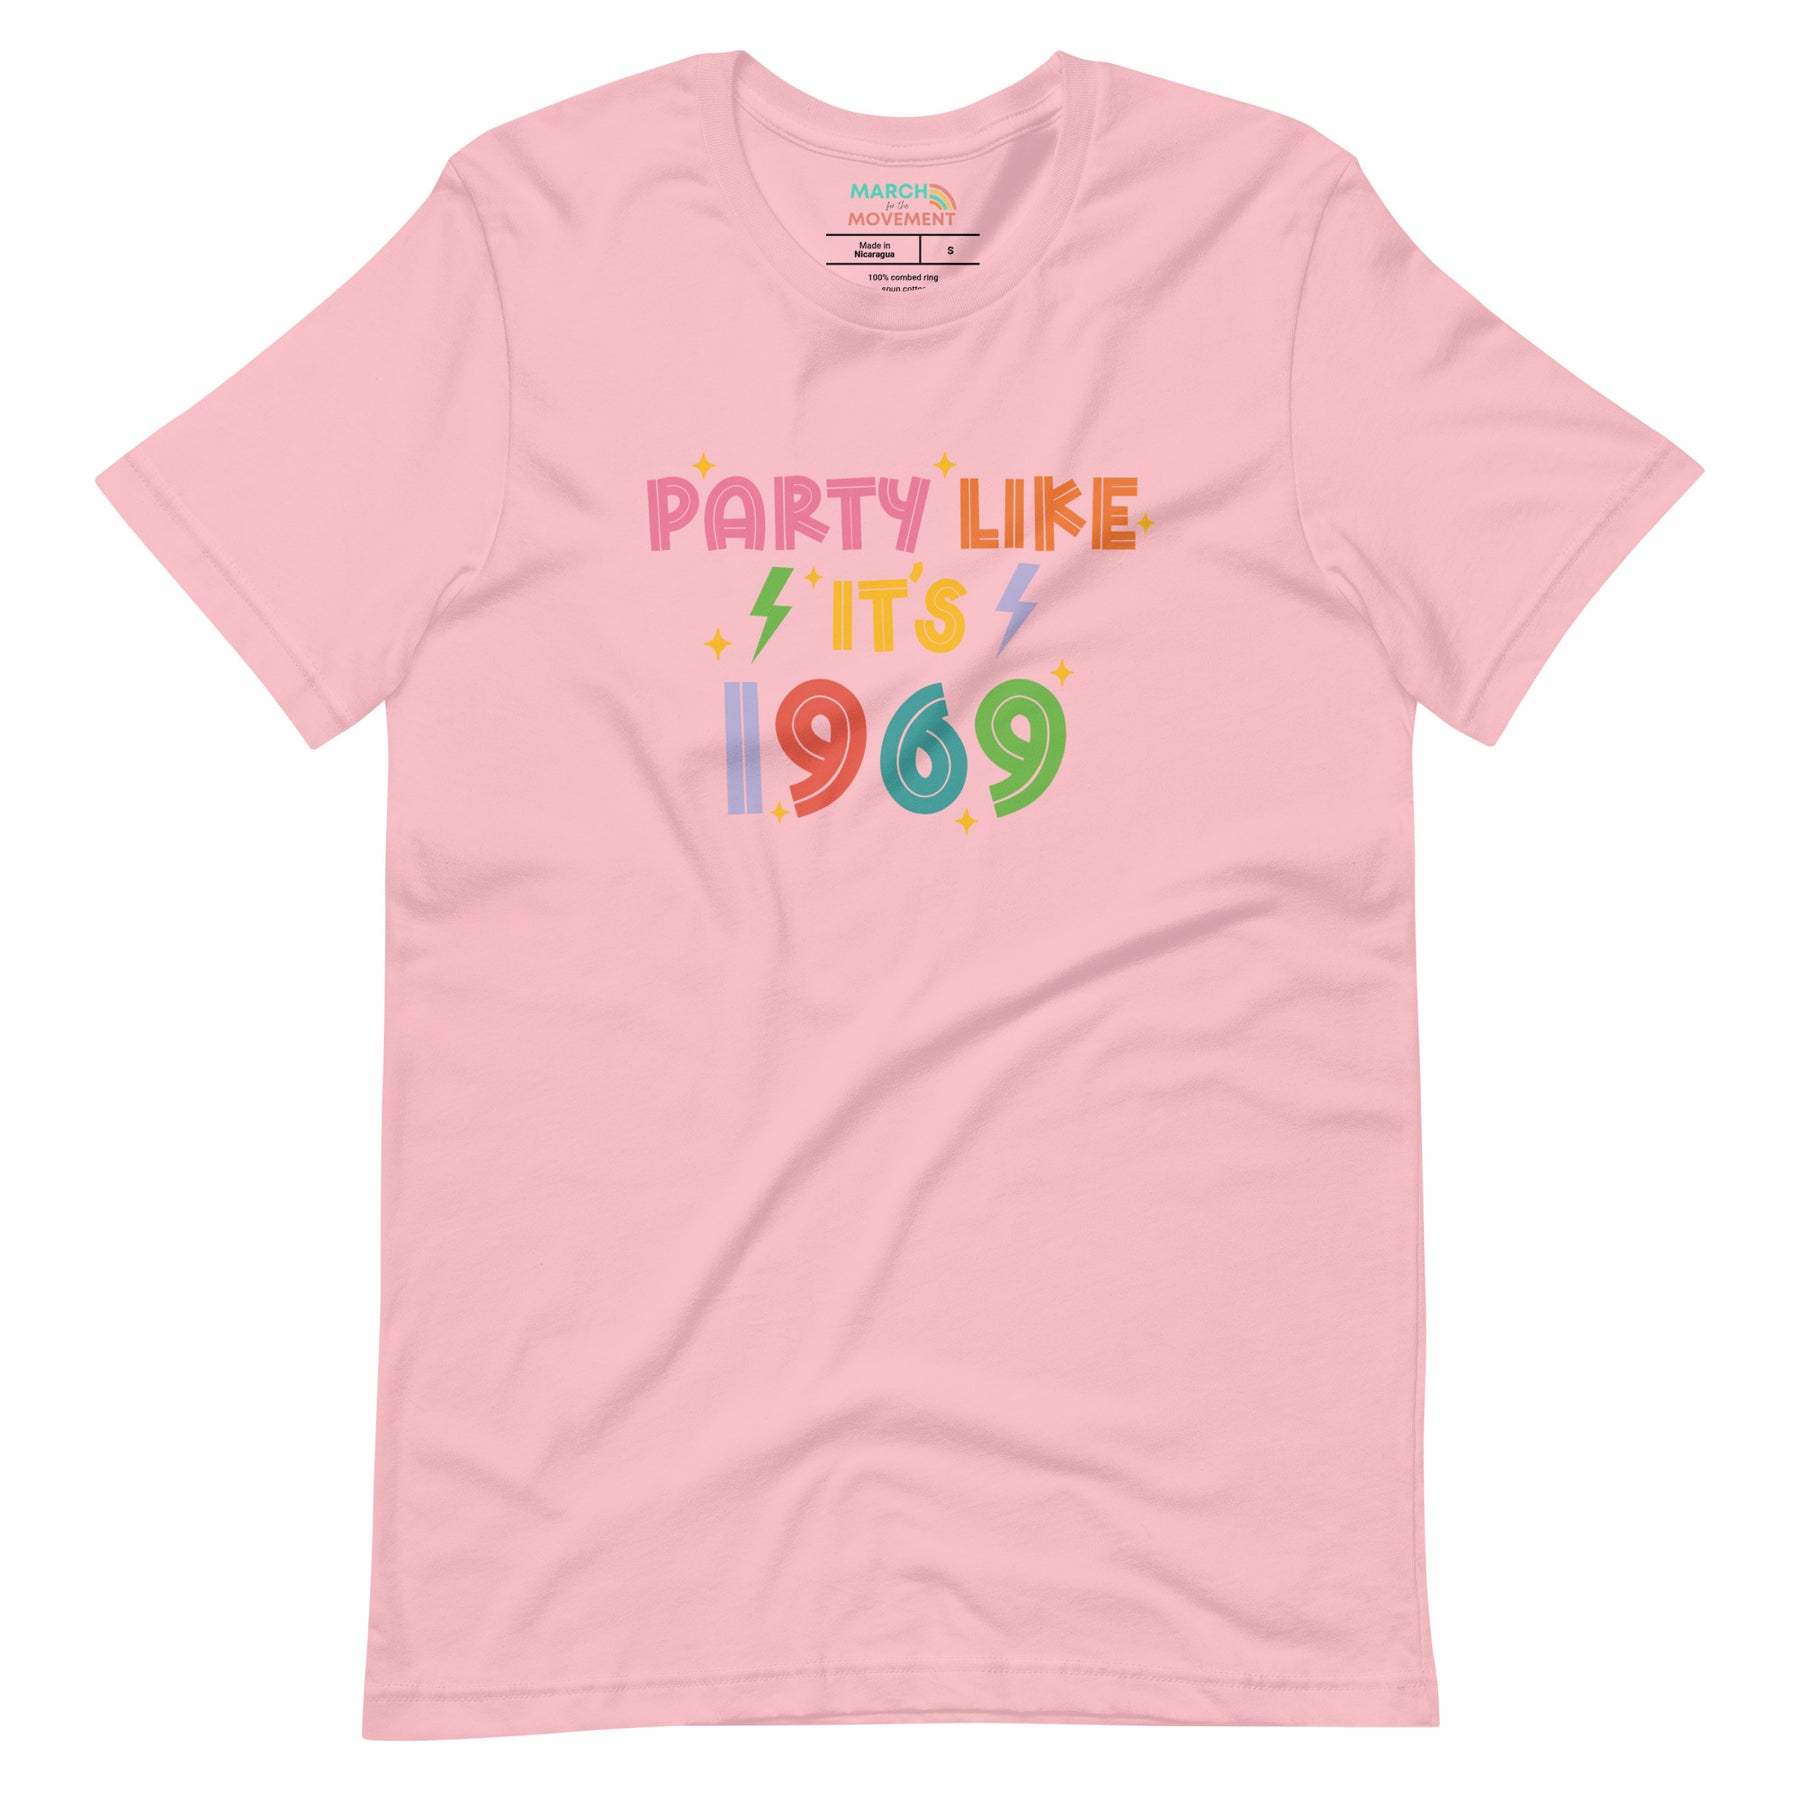 Party Like It's 1969 Pride T-Shirt